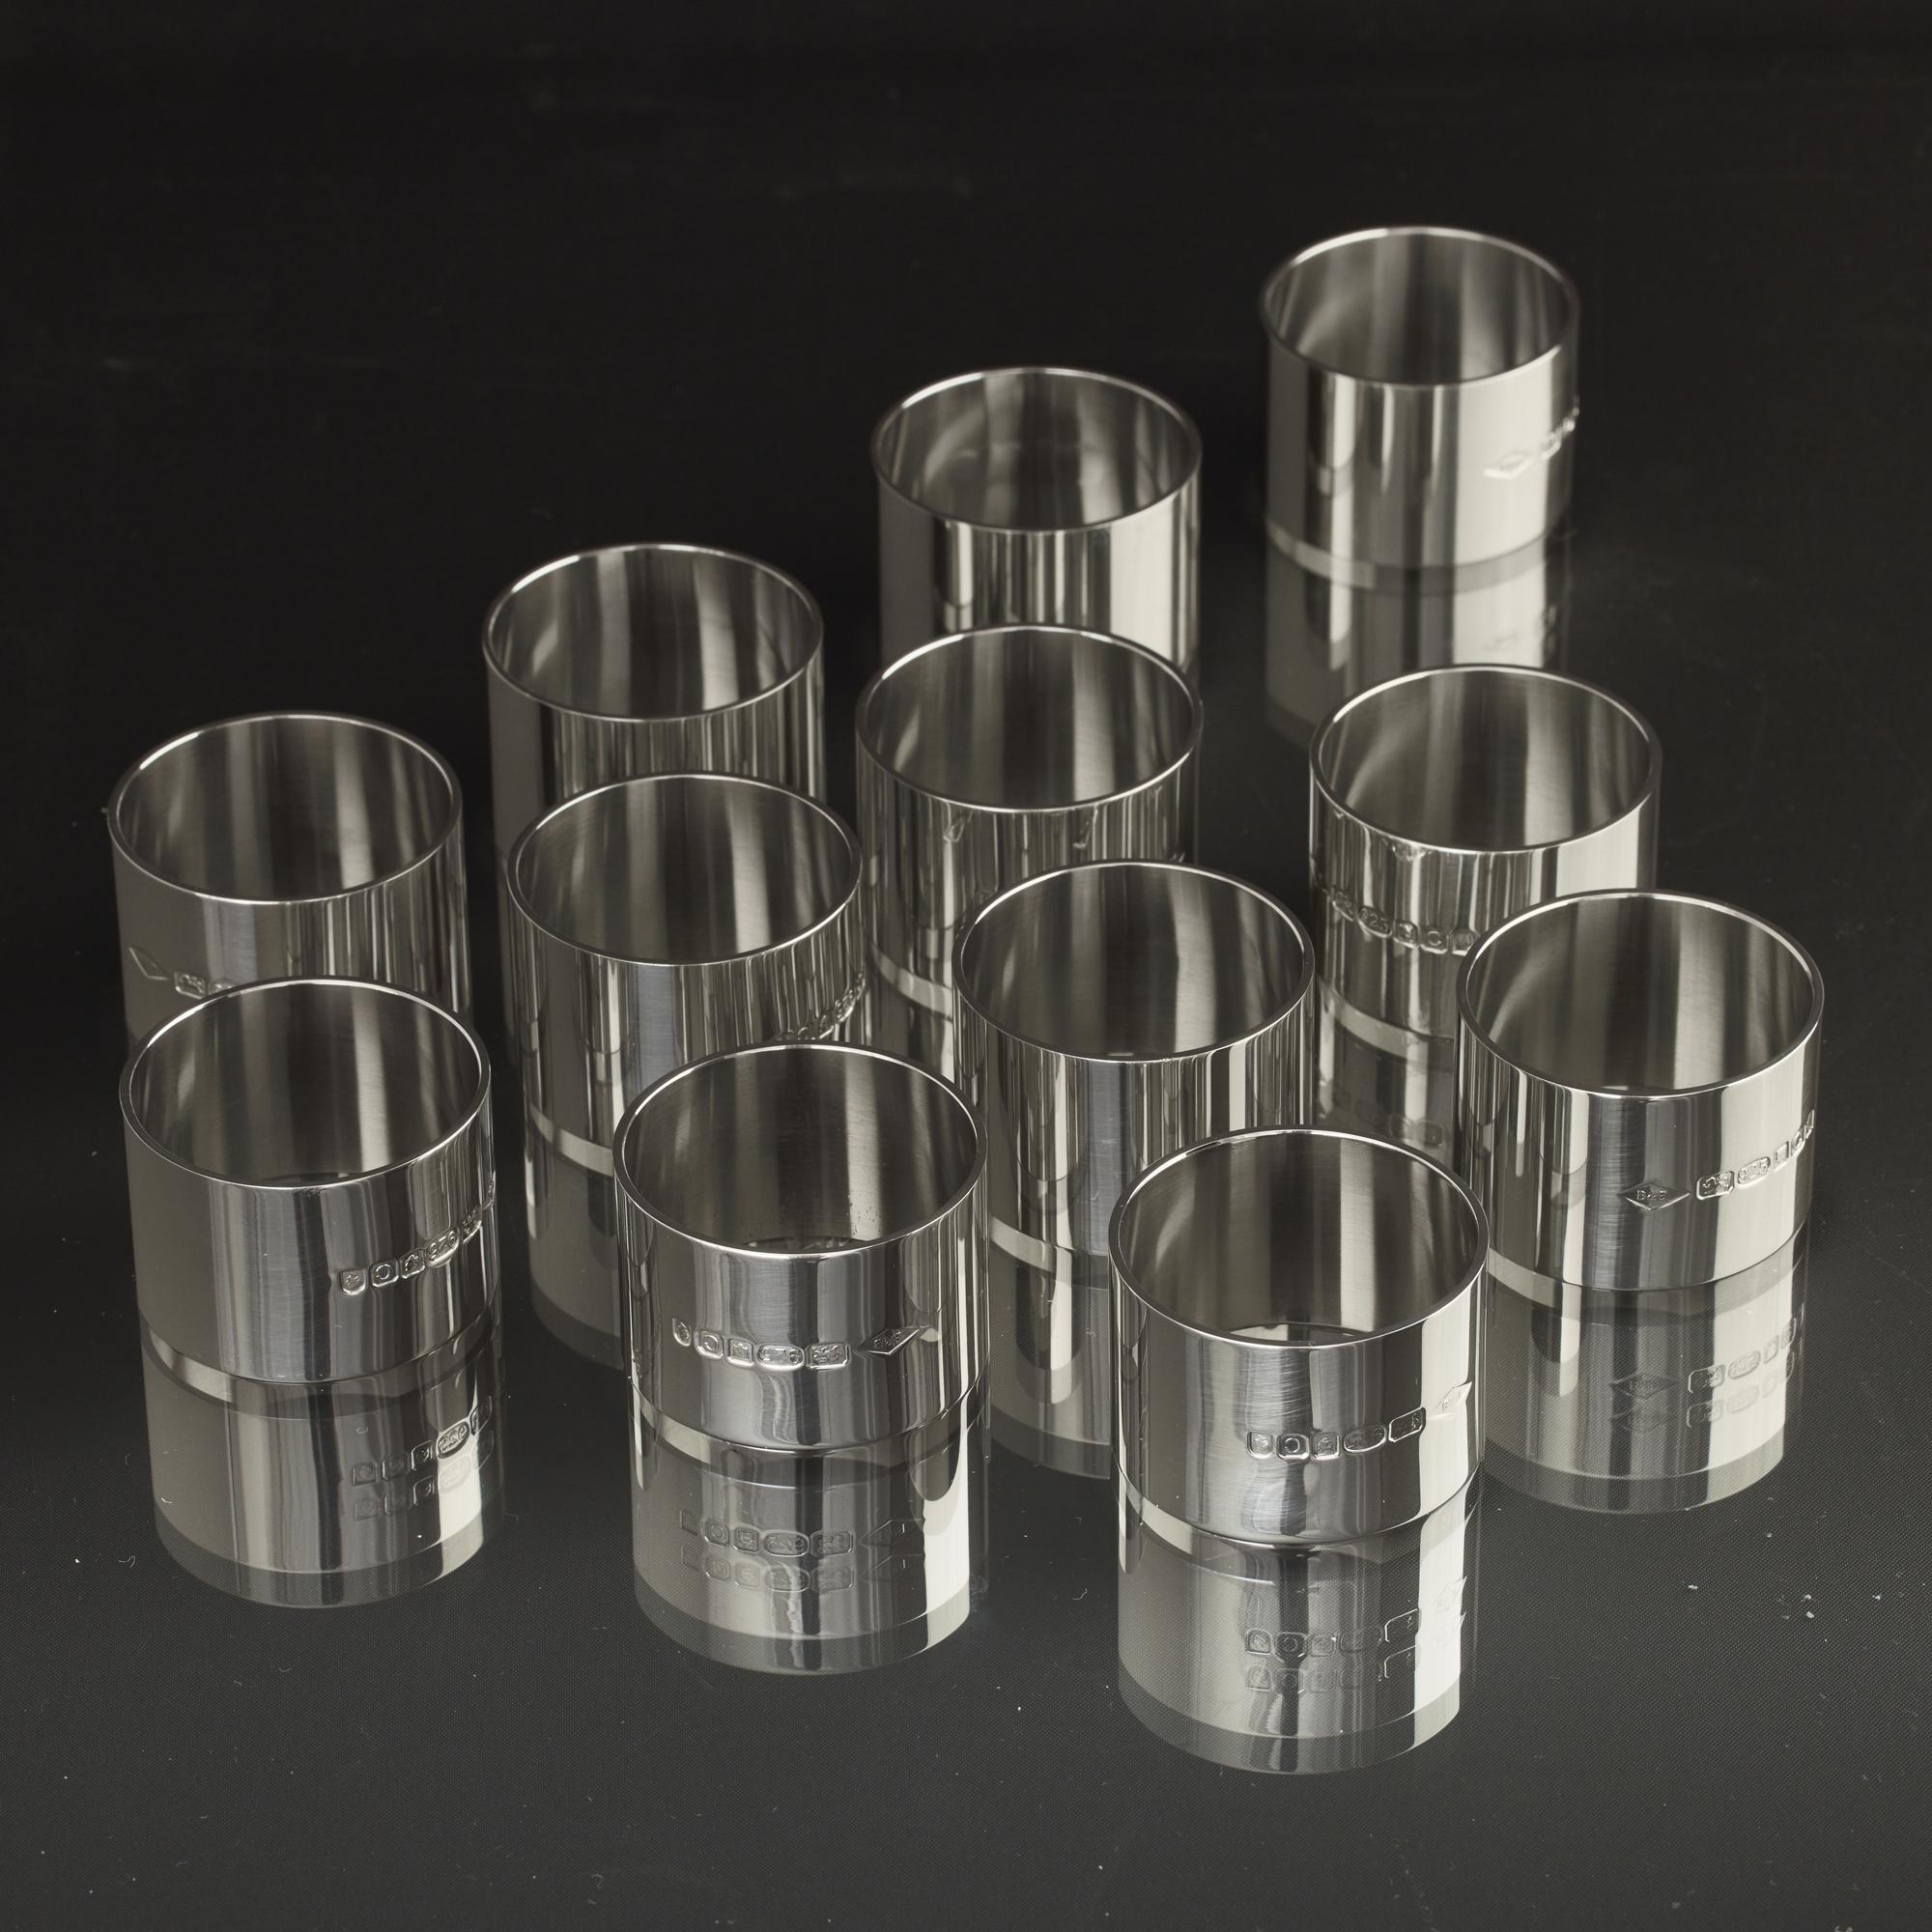 A set of 12 simple, heavy-gauge silver napkin rings, each weighing more than two troy ounces (62 g). Their simplicity provides a canvas for personalising by engraving initials, crests or any other imagery.
 
 Contact us for advice and further